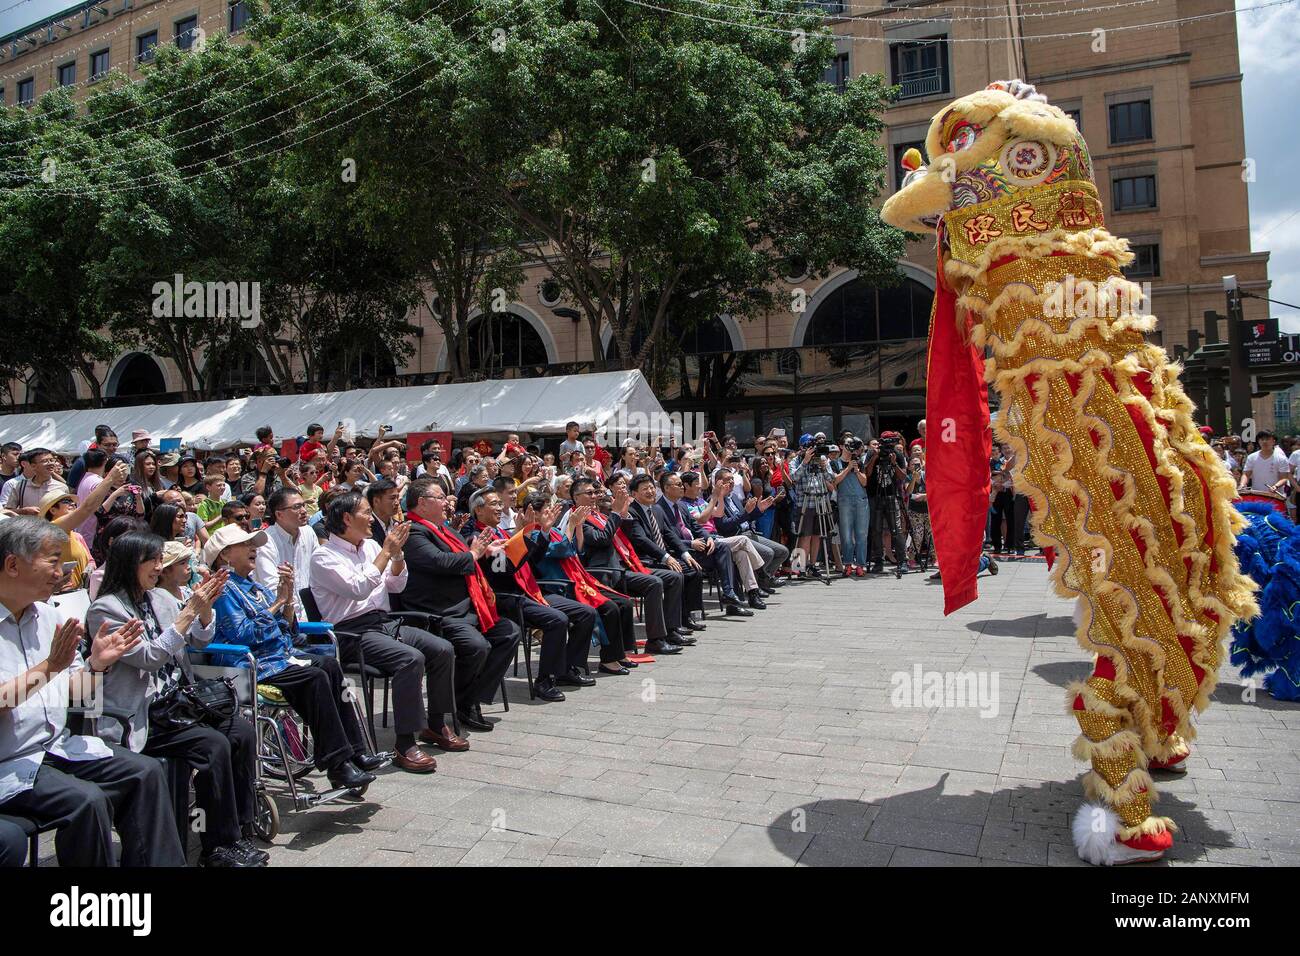 Johannesburg, South Africa. 19th Jan, 2020. The audience applaud for the lion dance during celebrations for the upcoming Chinese Lunar New Year in Johannesburg, South Africa, Jan. 19, 2020. Hundreds of Chinese and South Africans of all ages from different backgrounds gathered together at Nelson Mandela Square in Johannesburg on Sunday to celebrate Chinese Lunar New Year. A number of performers based both in China and South Africa entertained the attendees with music and dance. Credit: Chen Cheng/Xinhua/Alamy Live News Stock Photo